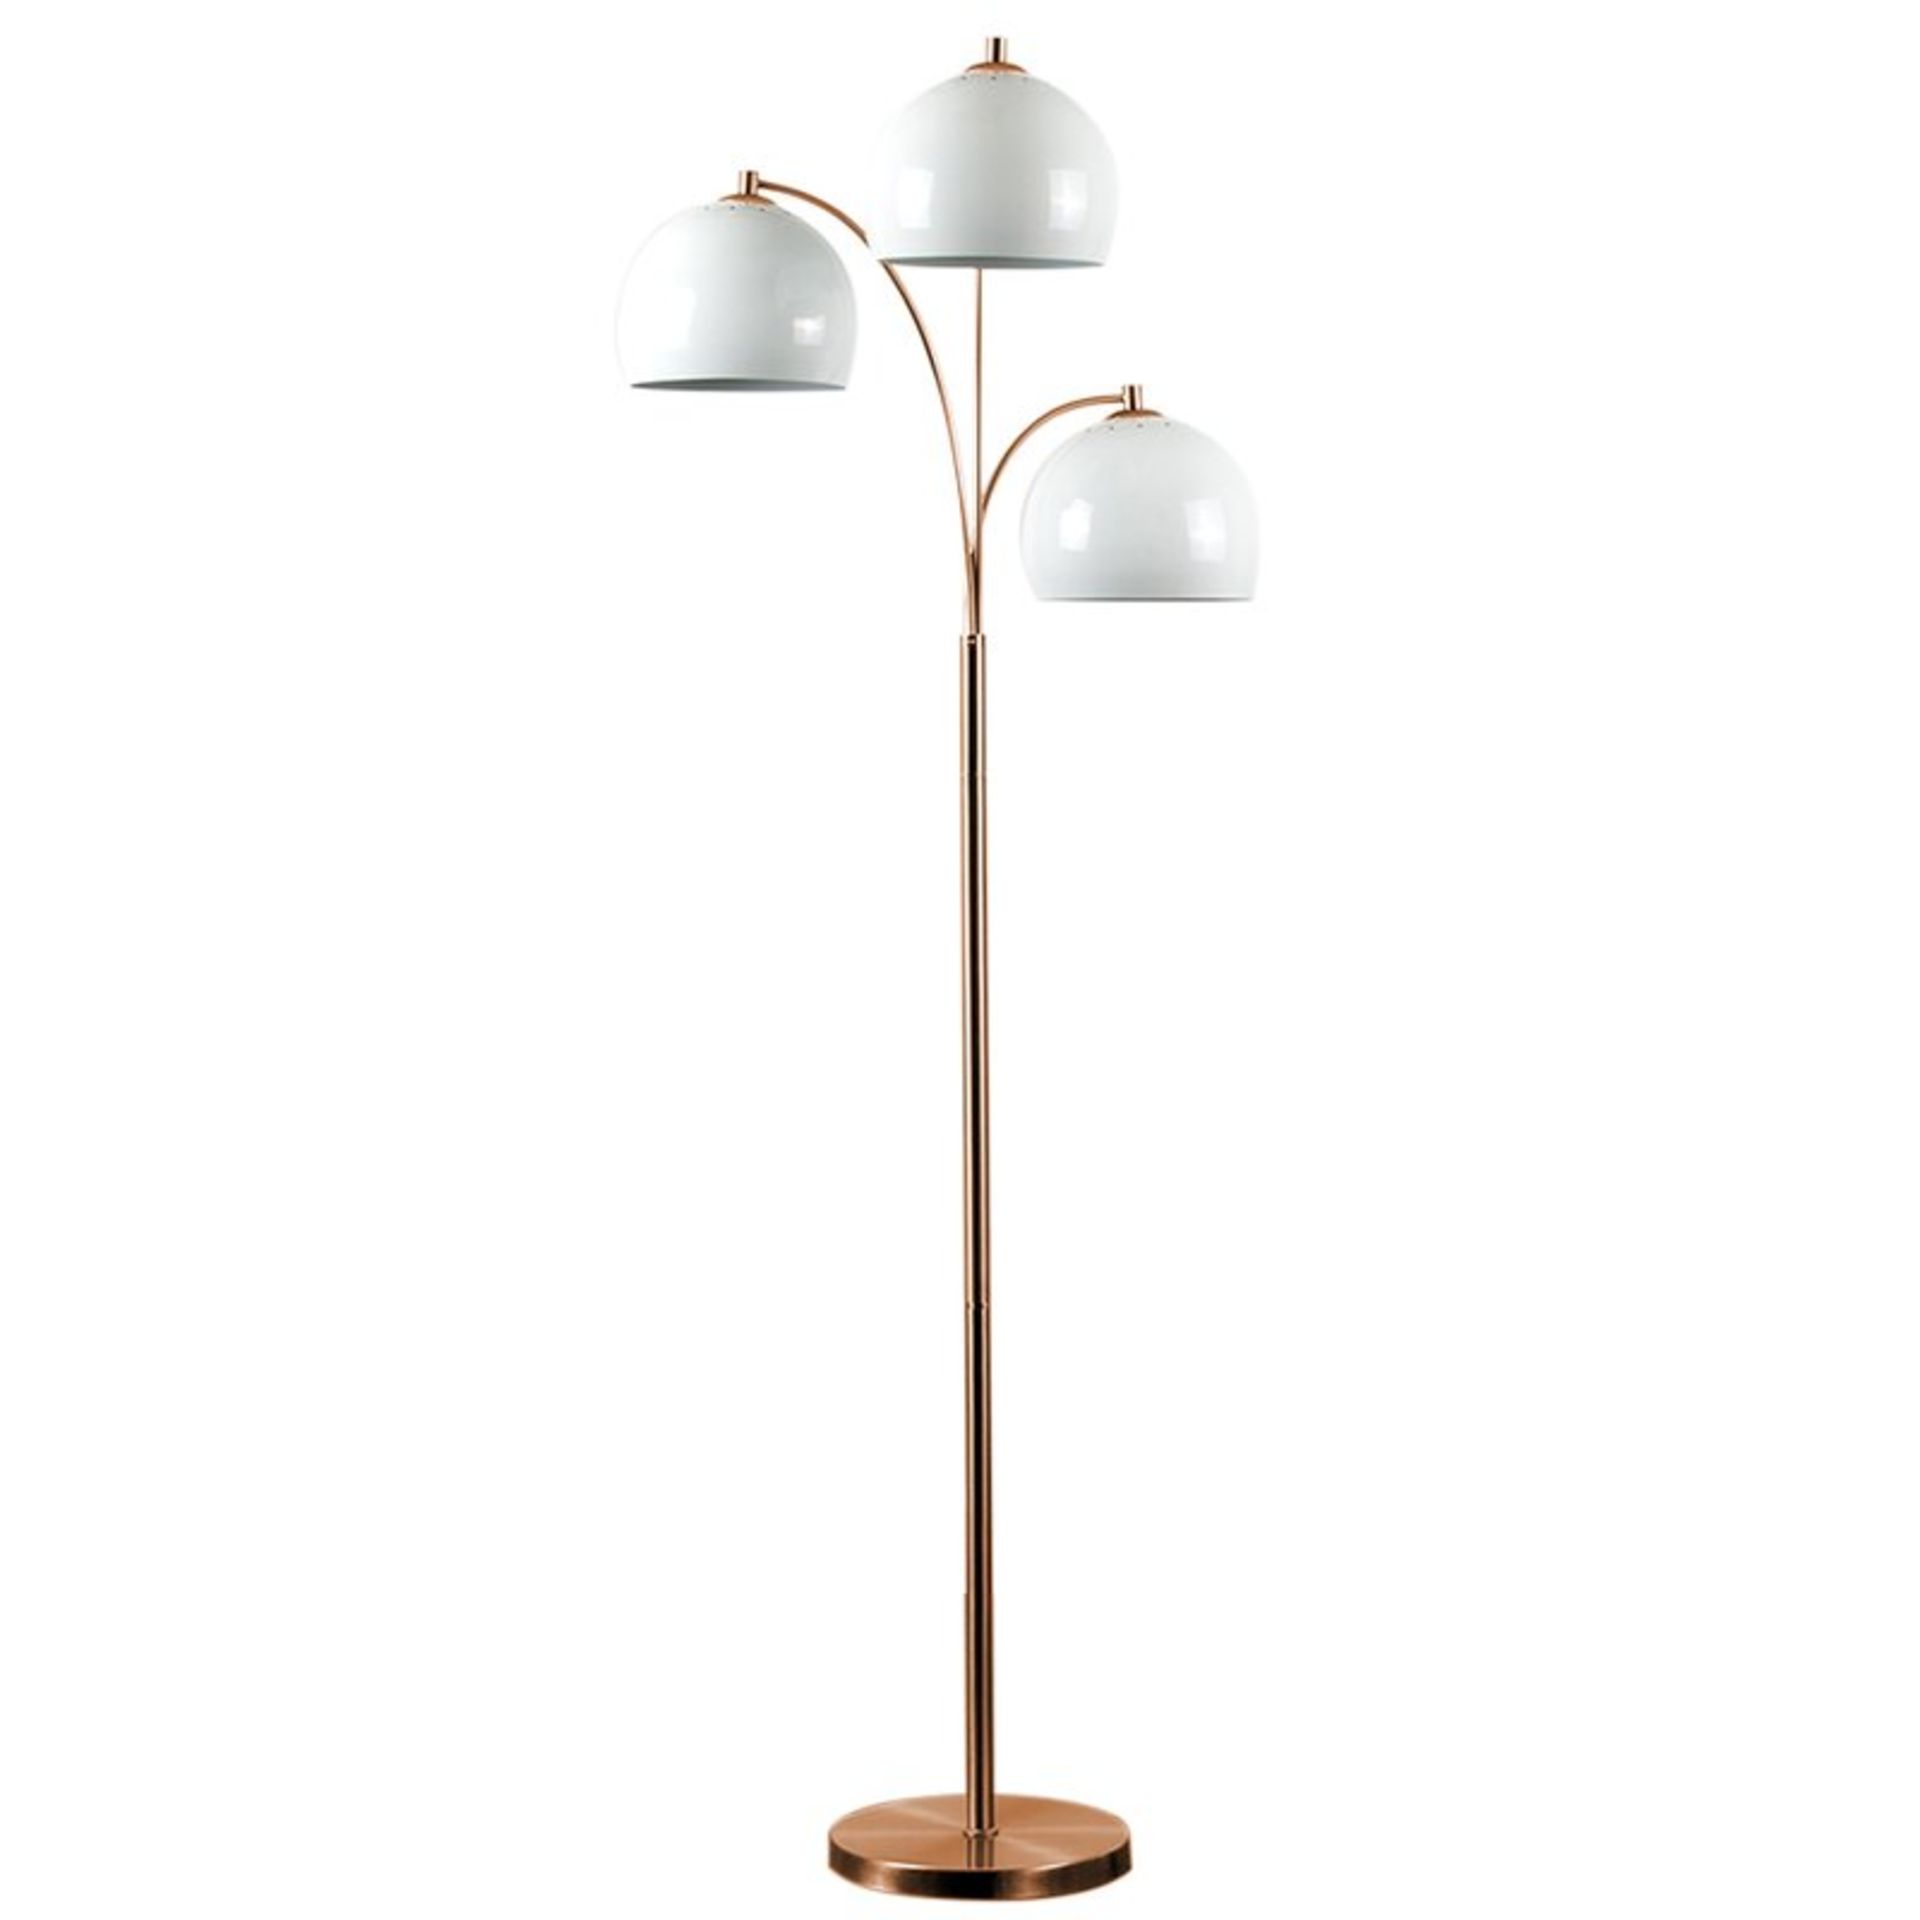 Isma 150cm Floor Lamp by 17 Stories - Image 2 of 3